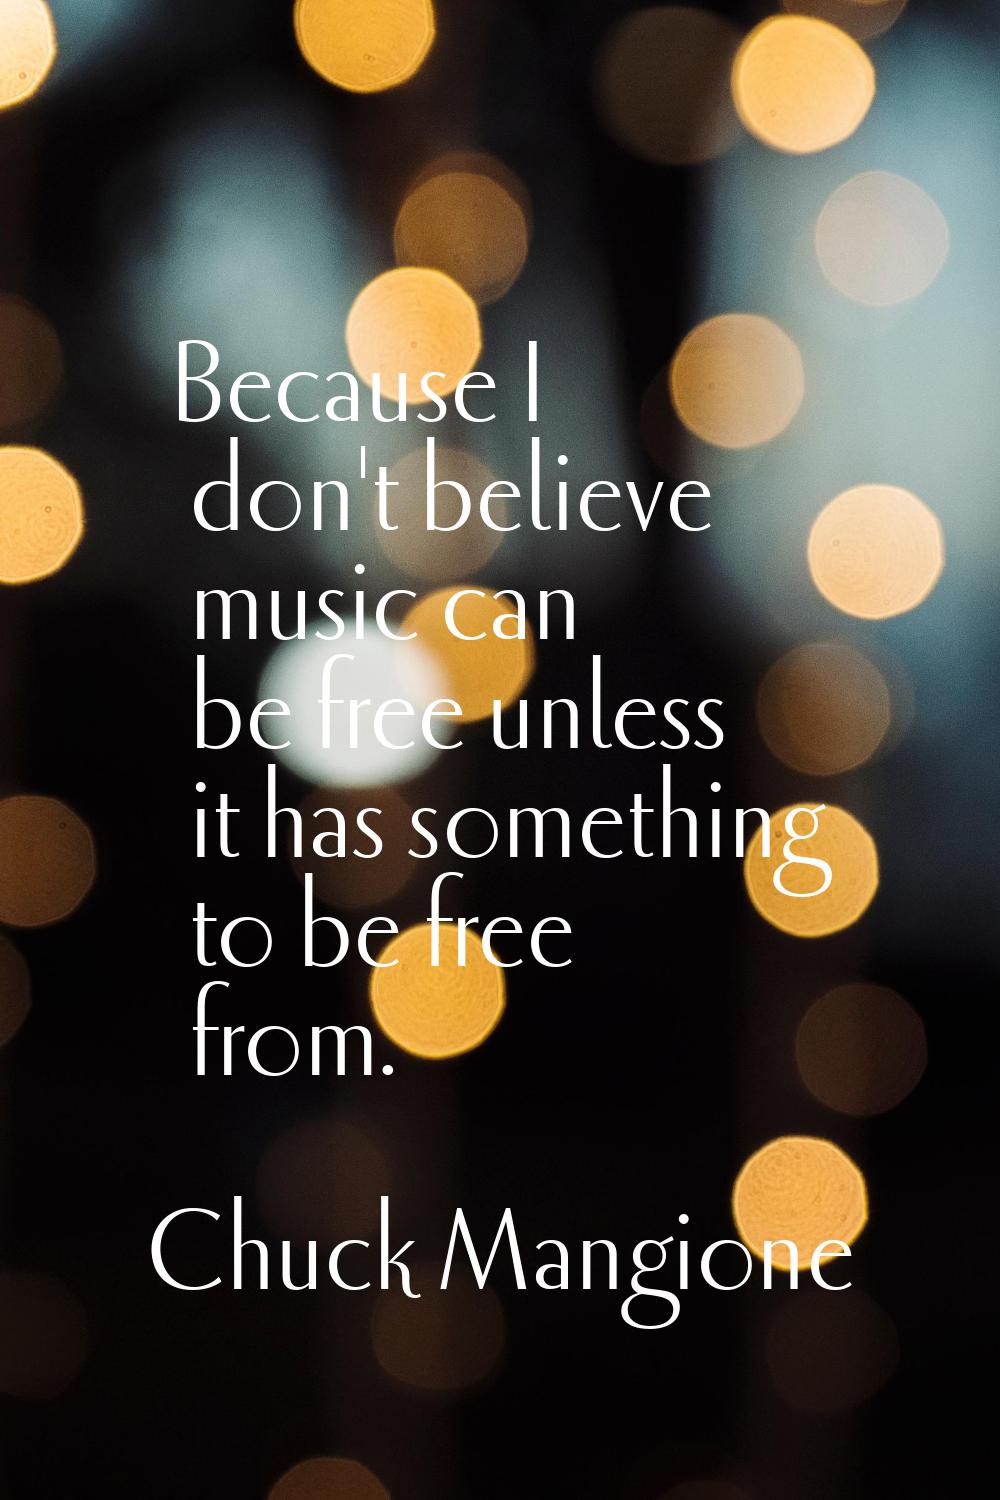 Because I don't believe music can be free unless it has something to be free from.